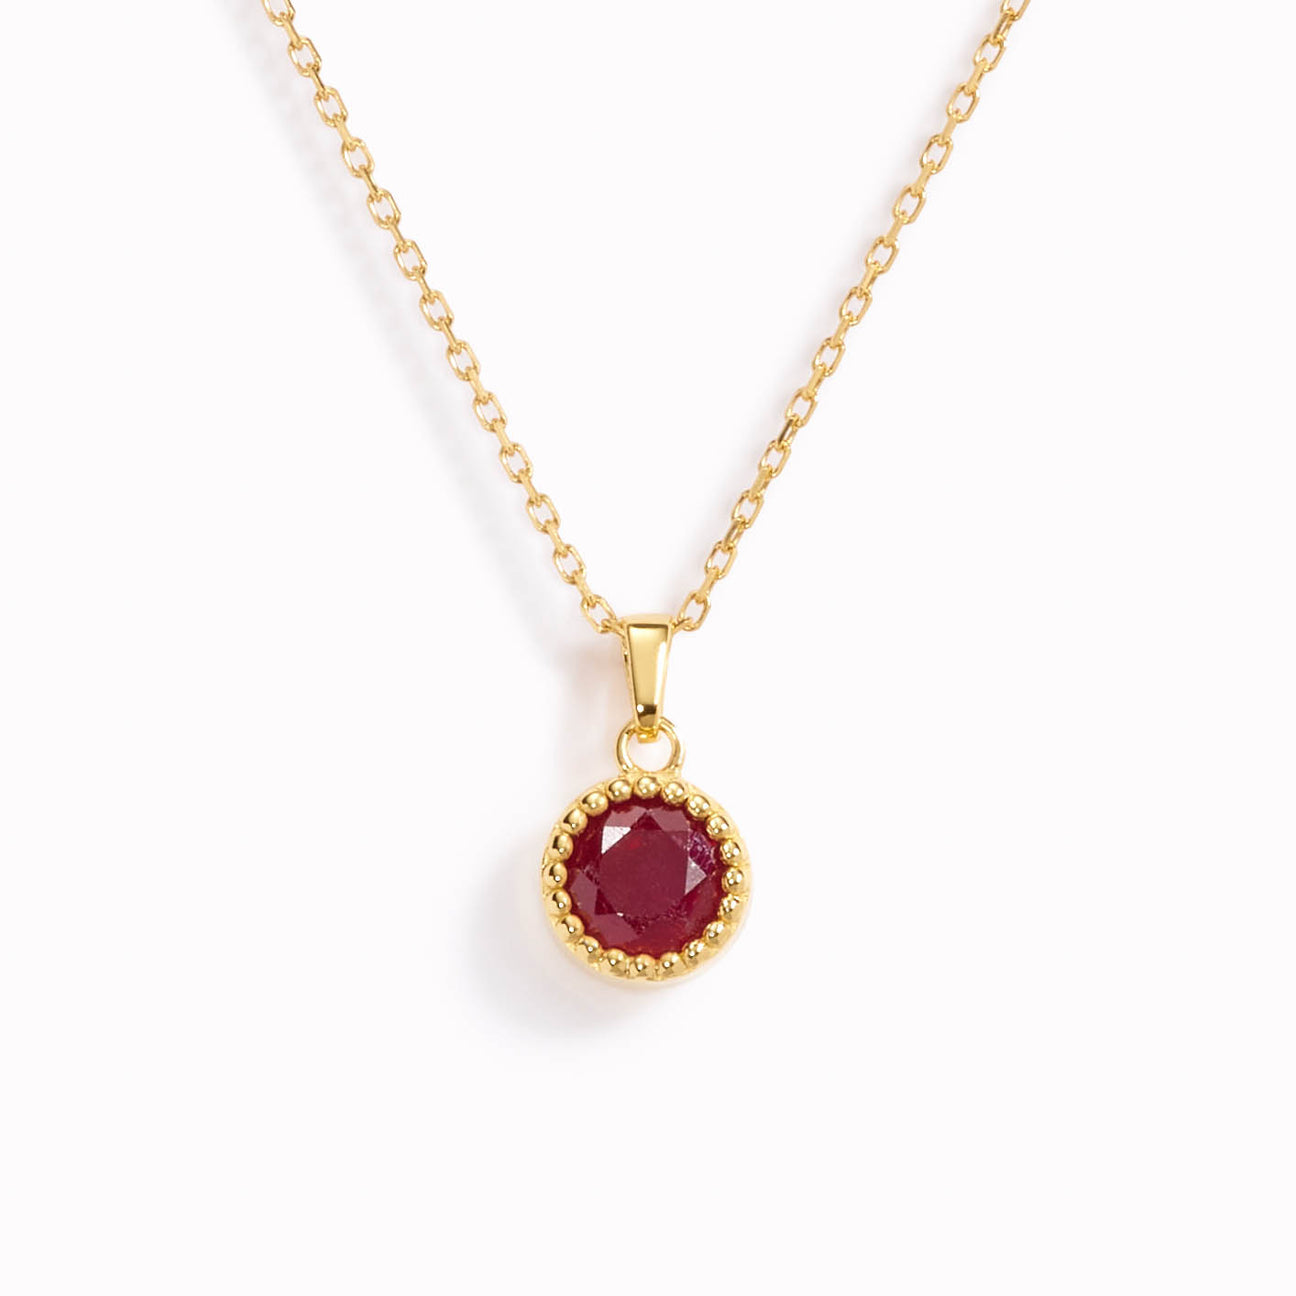 July Birthstone Necklace - Opaque Ruby | Linjer Jewelry